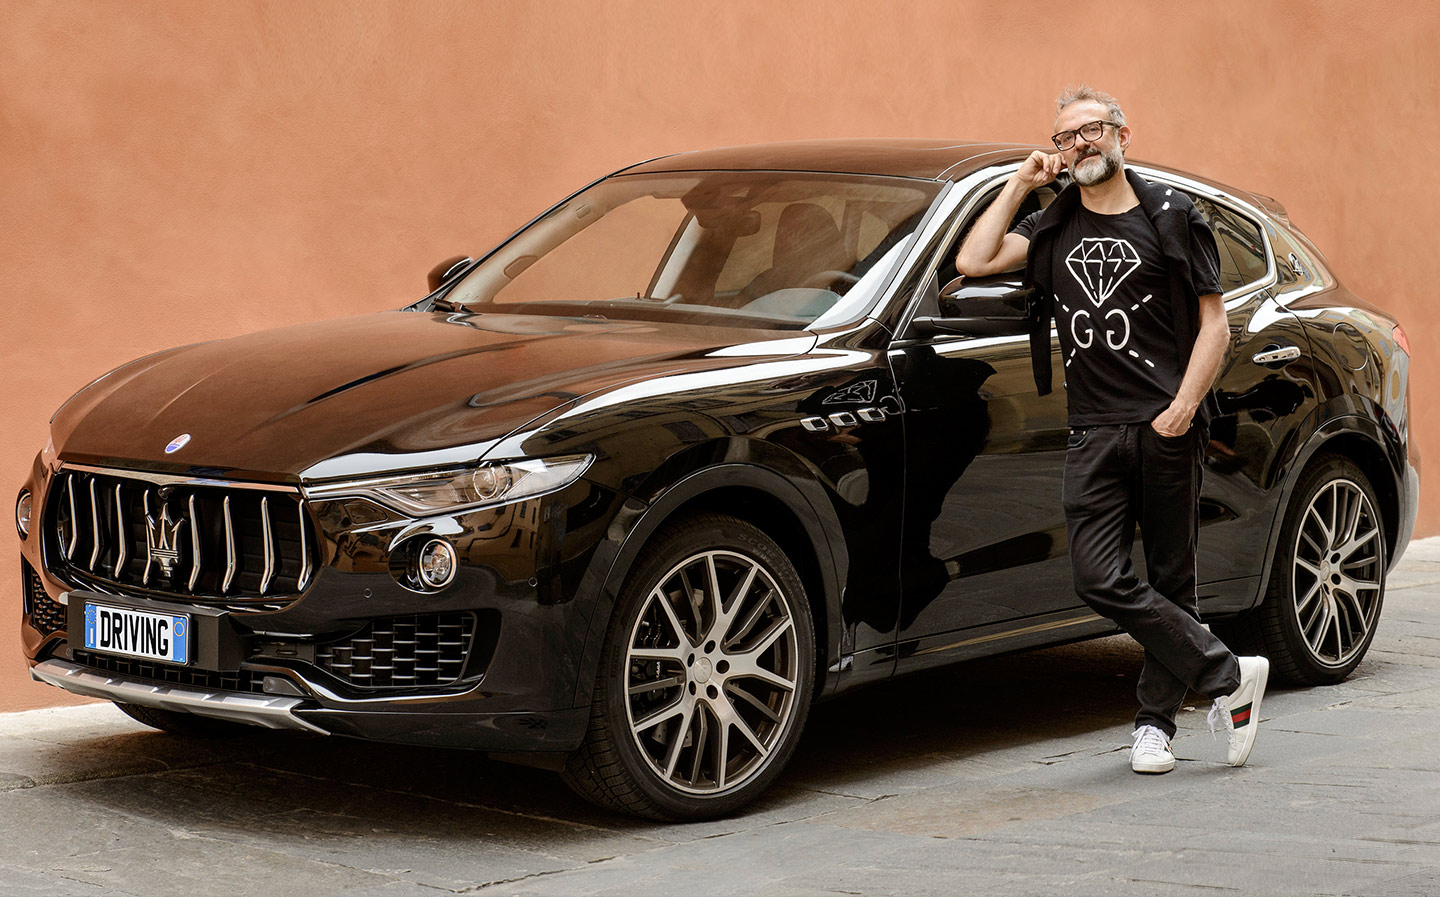 Me and My Motor: Massimo Bottura, chef behind the world's best restaurant